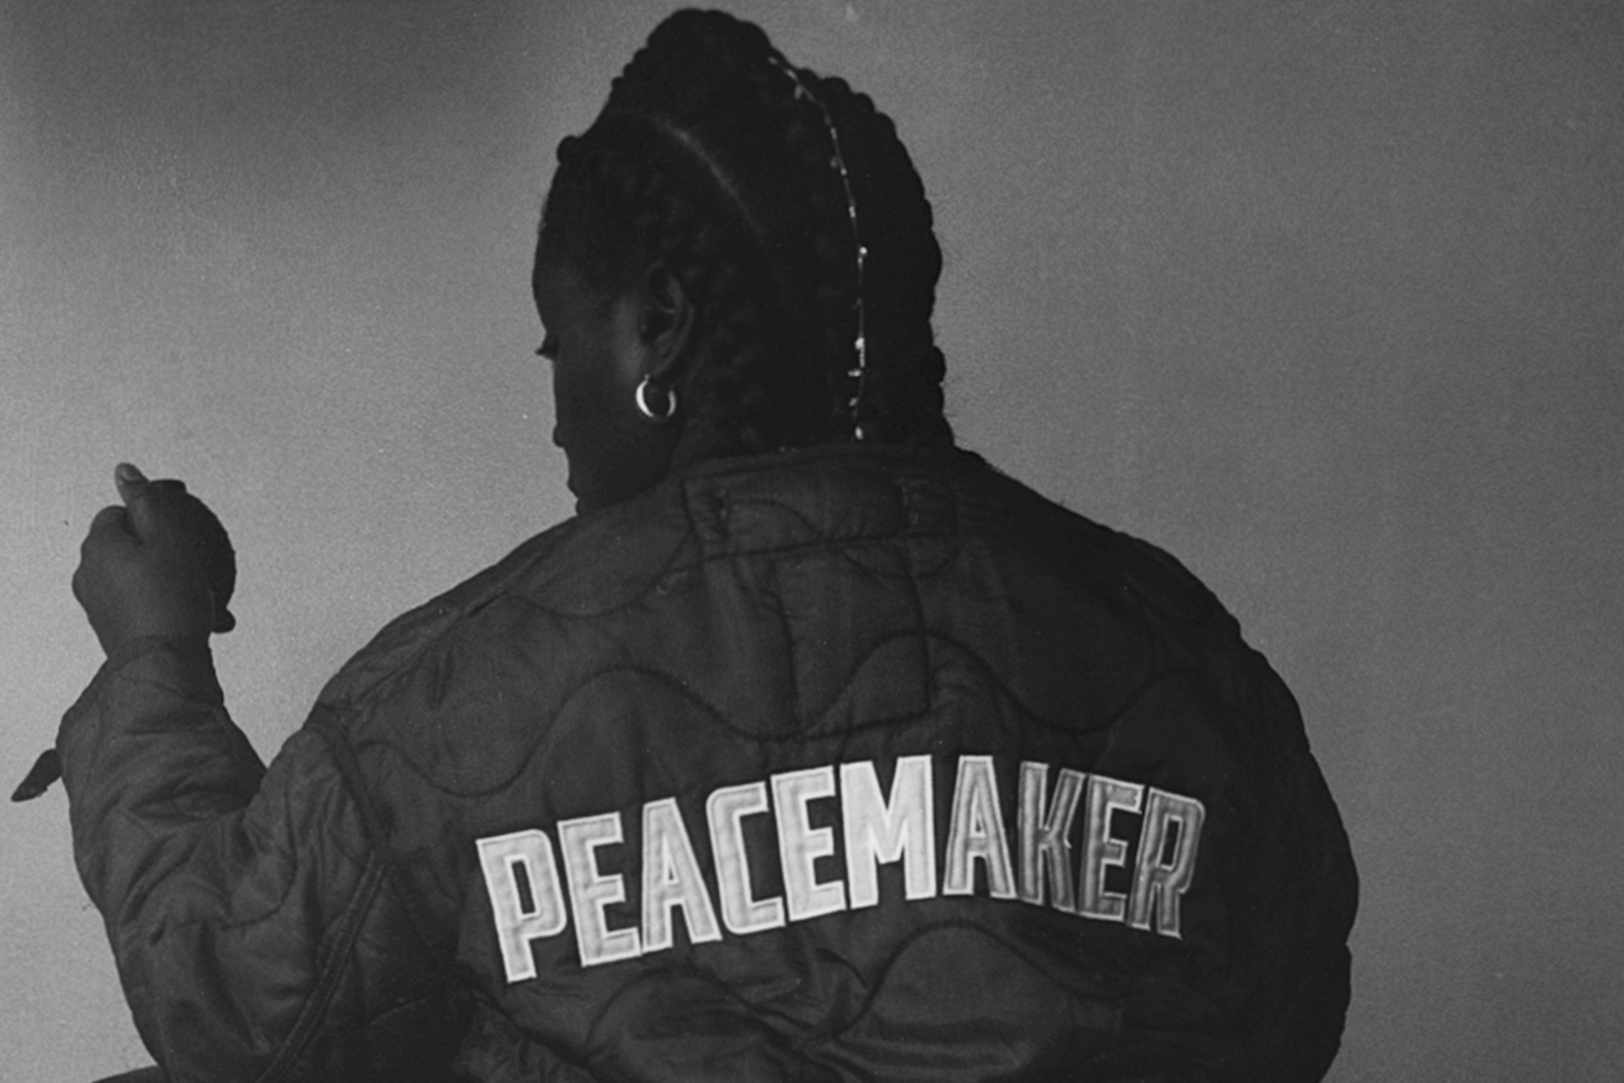 OAMC's Peacemaker jacket in interview